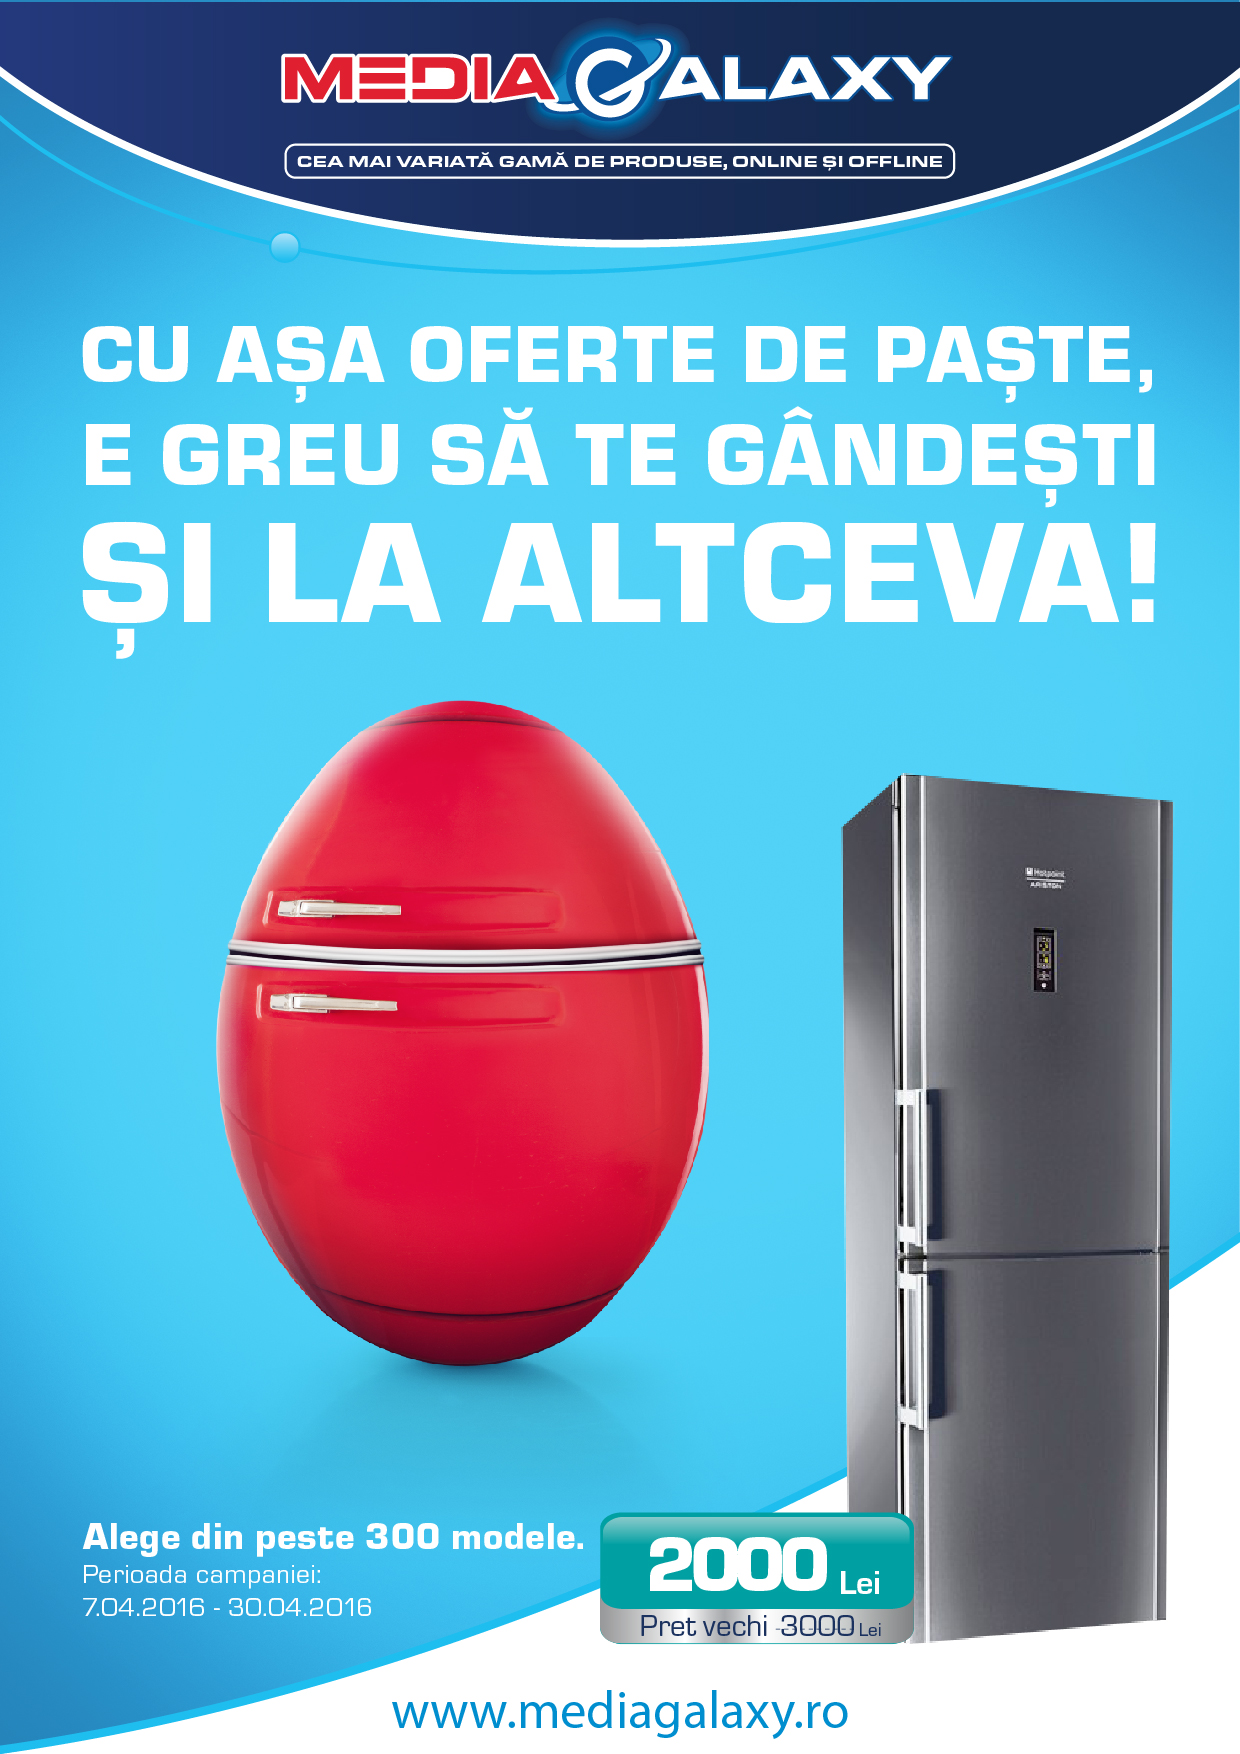 Media Galaxy easter offers